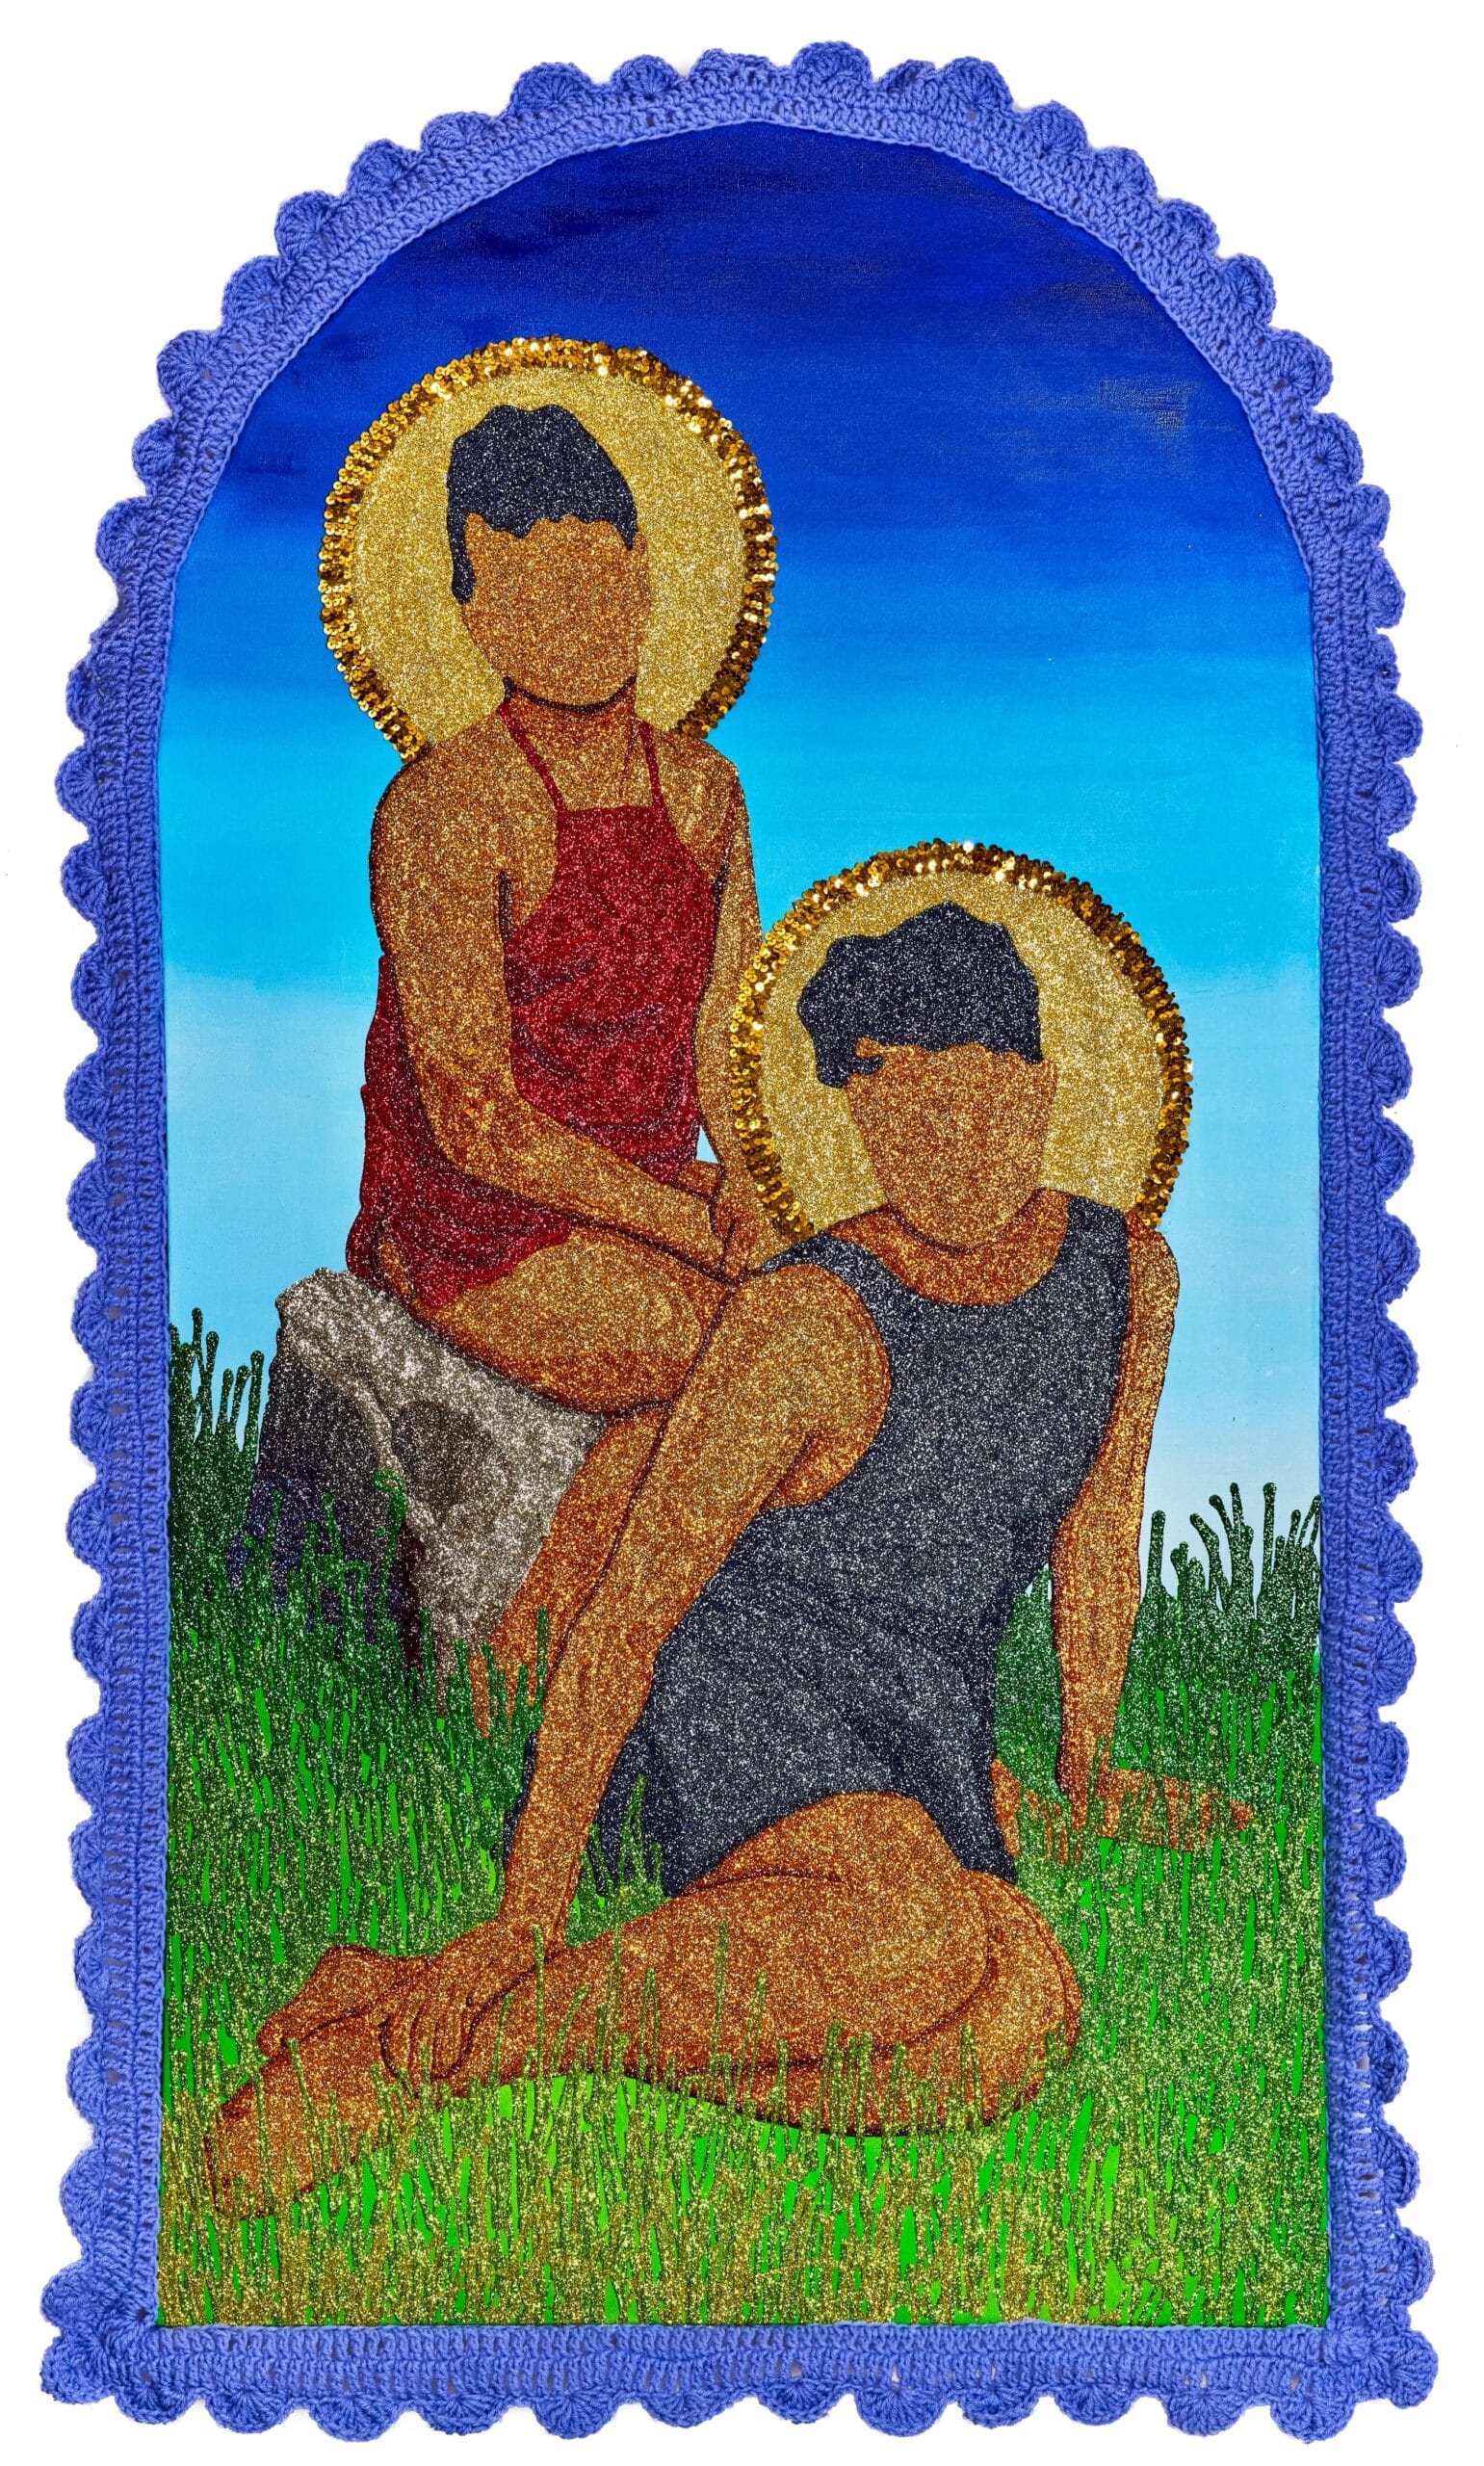 two faceless figure wearing a red and blue dress pose on a rock and grass. they're rendered in glitter with gold halos around their heads. a blue crocheted frame surrounds the work